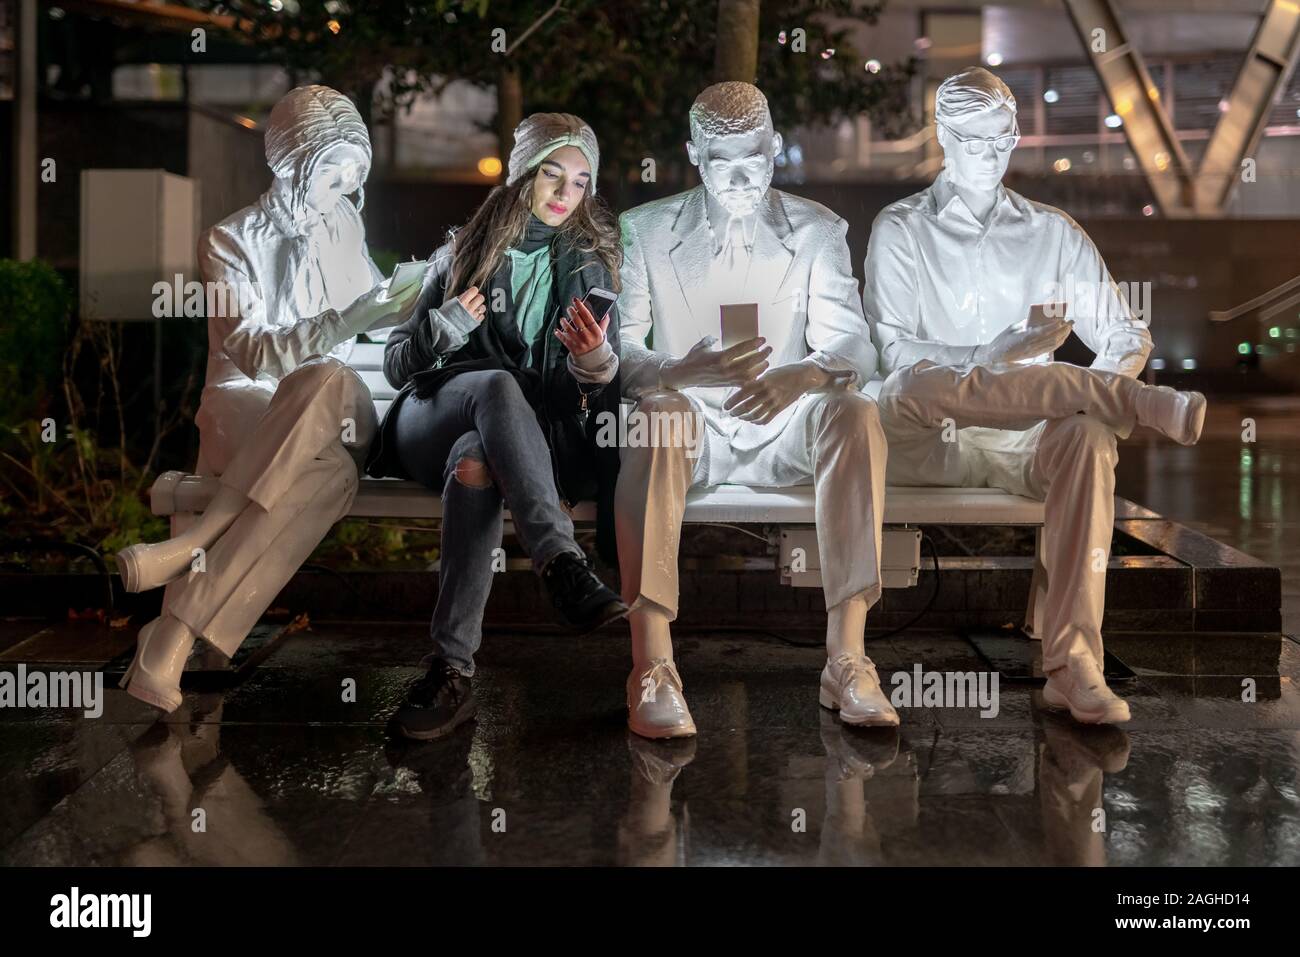 London, UK. 19th December, 2019. IlluminoCity exhibition by Light Art Collection. Student Rebecca, 20, models 'Absorbed by Light' installation by Gali May Lucas, part of IlluminoCity light exhibition in Principal Place, Shoreditch. Credit: Guy Corbishley/Alamy Live News Stock Photo